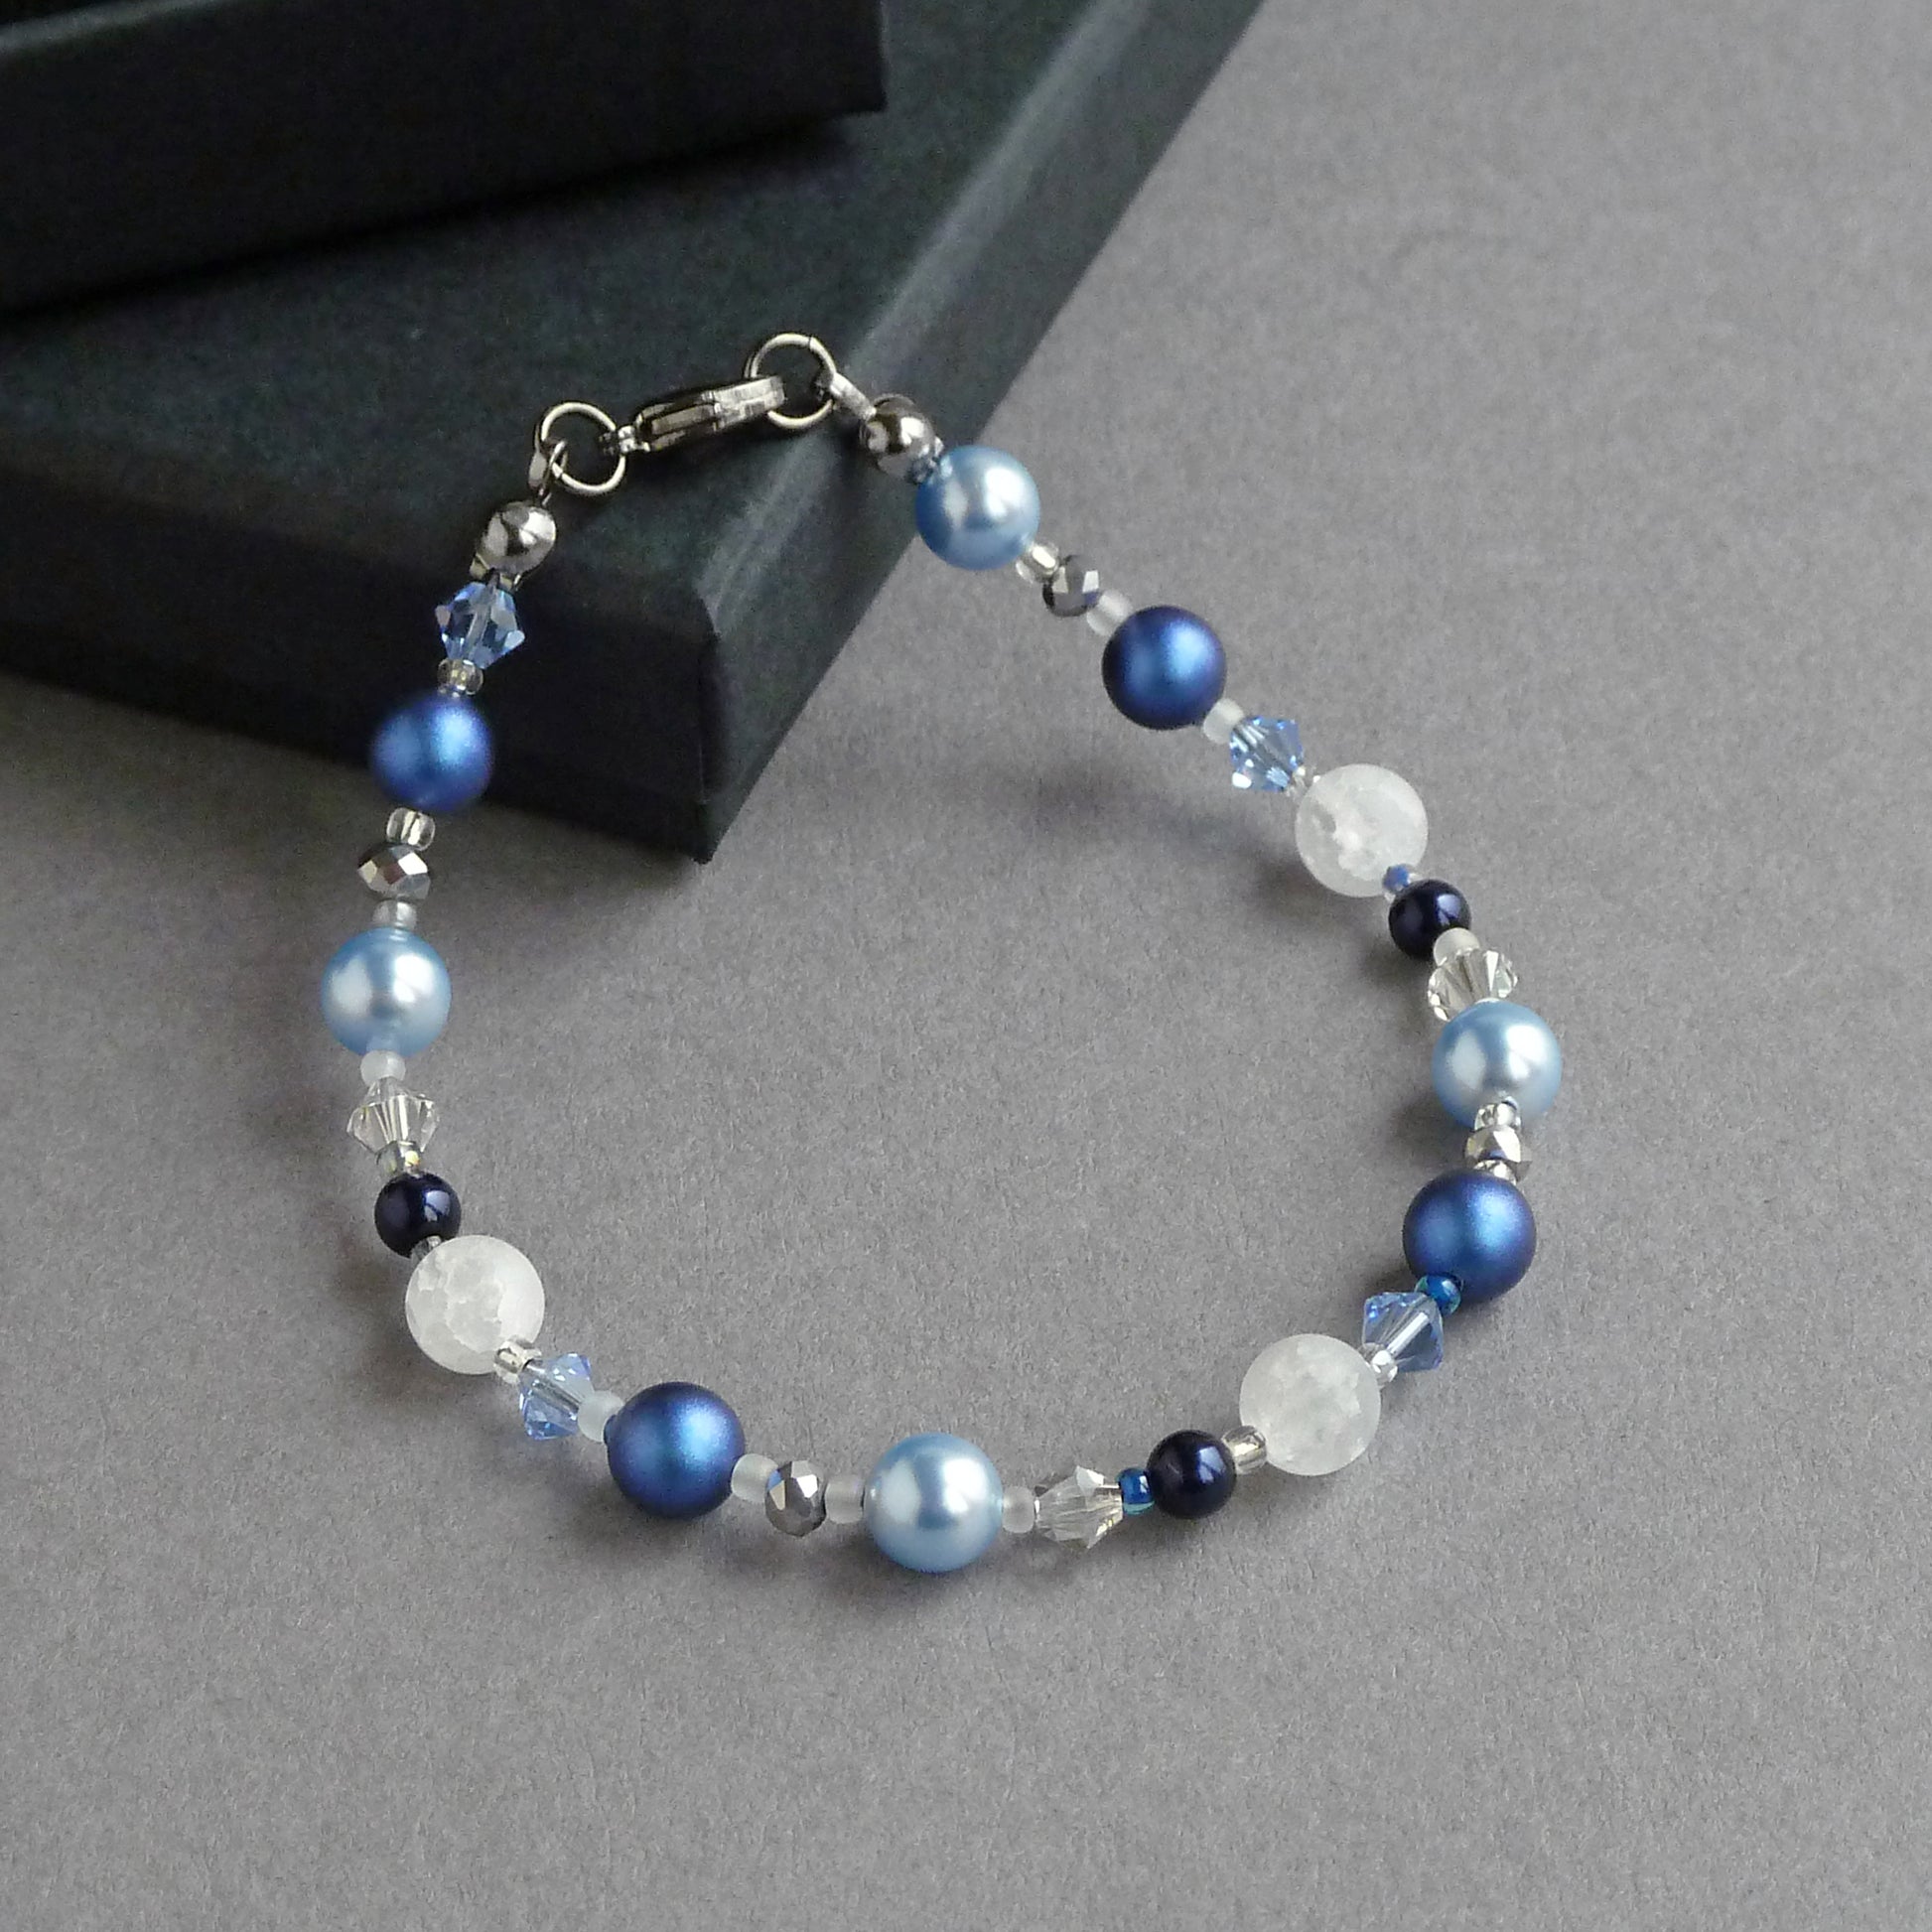 Royal blue single strand bracelet made with glass pearls, crystals, quartz and glass beads.